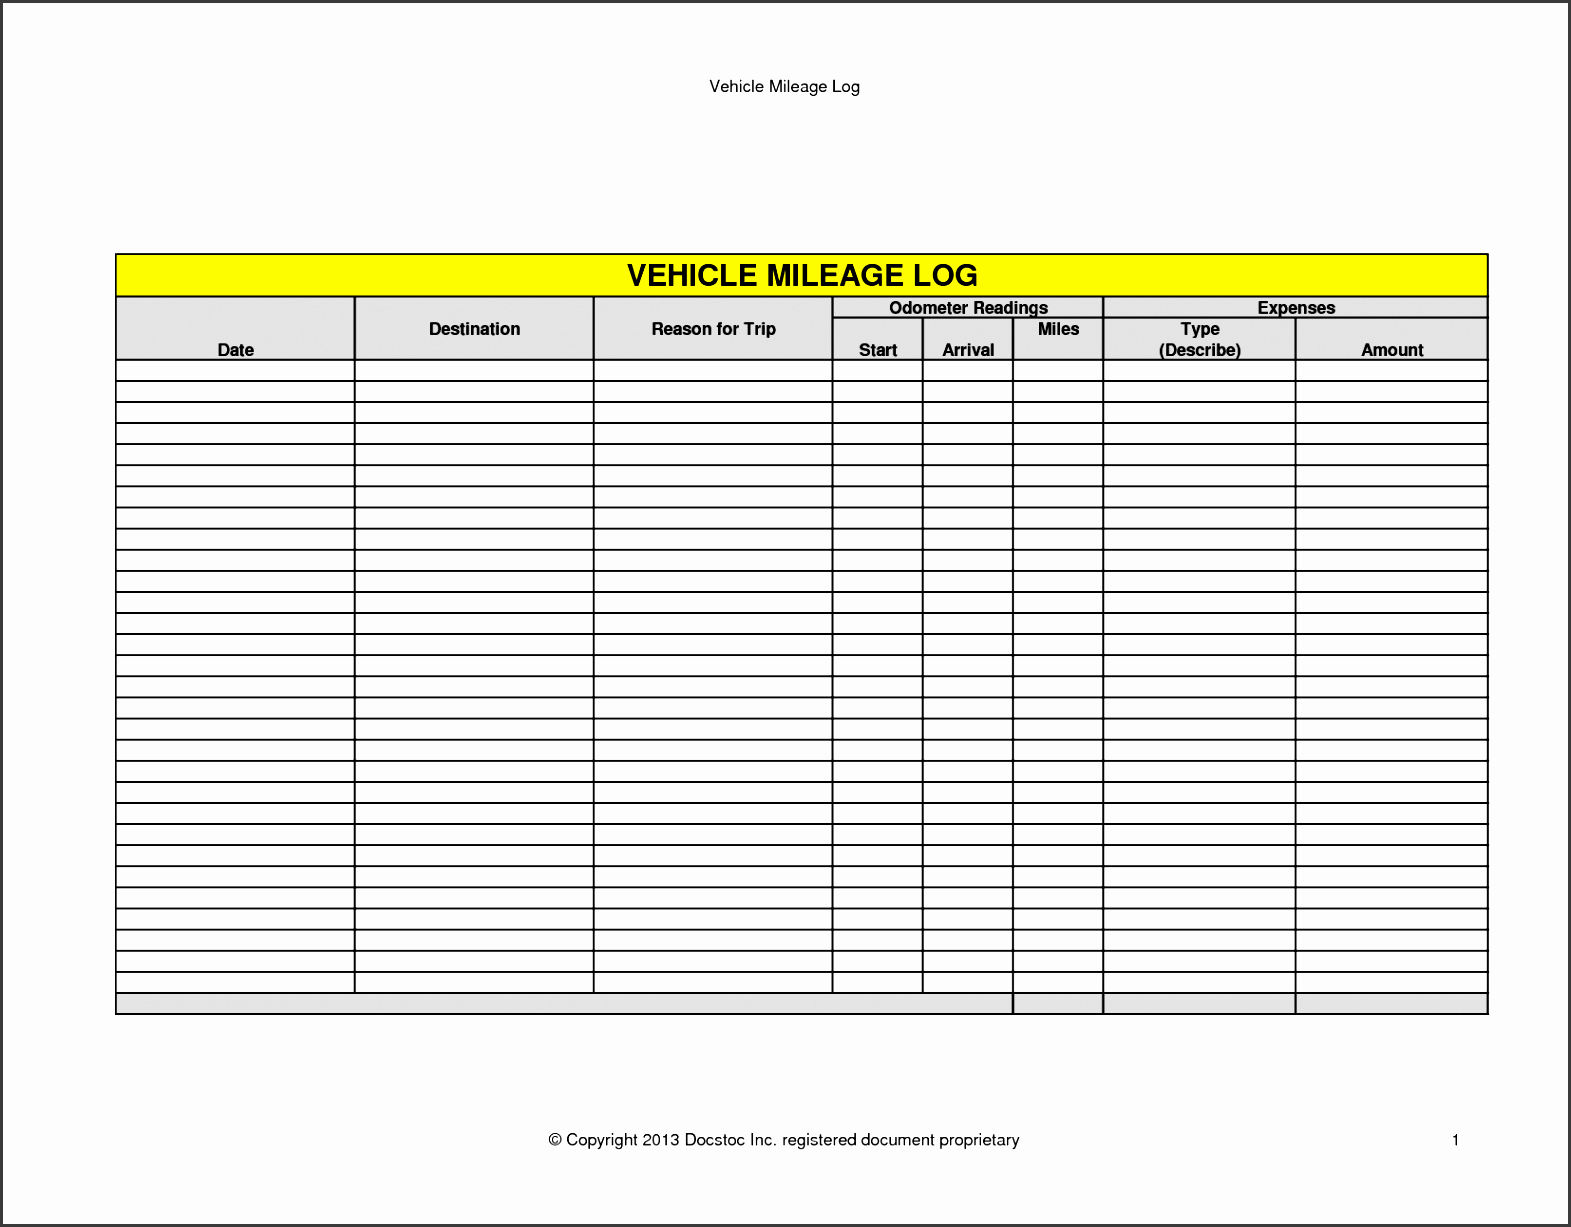 image vehicle mileage log template pc android iphone and